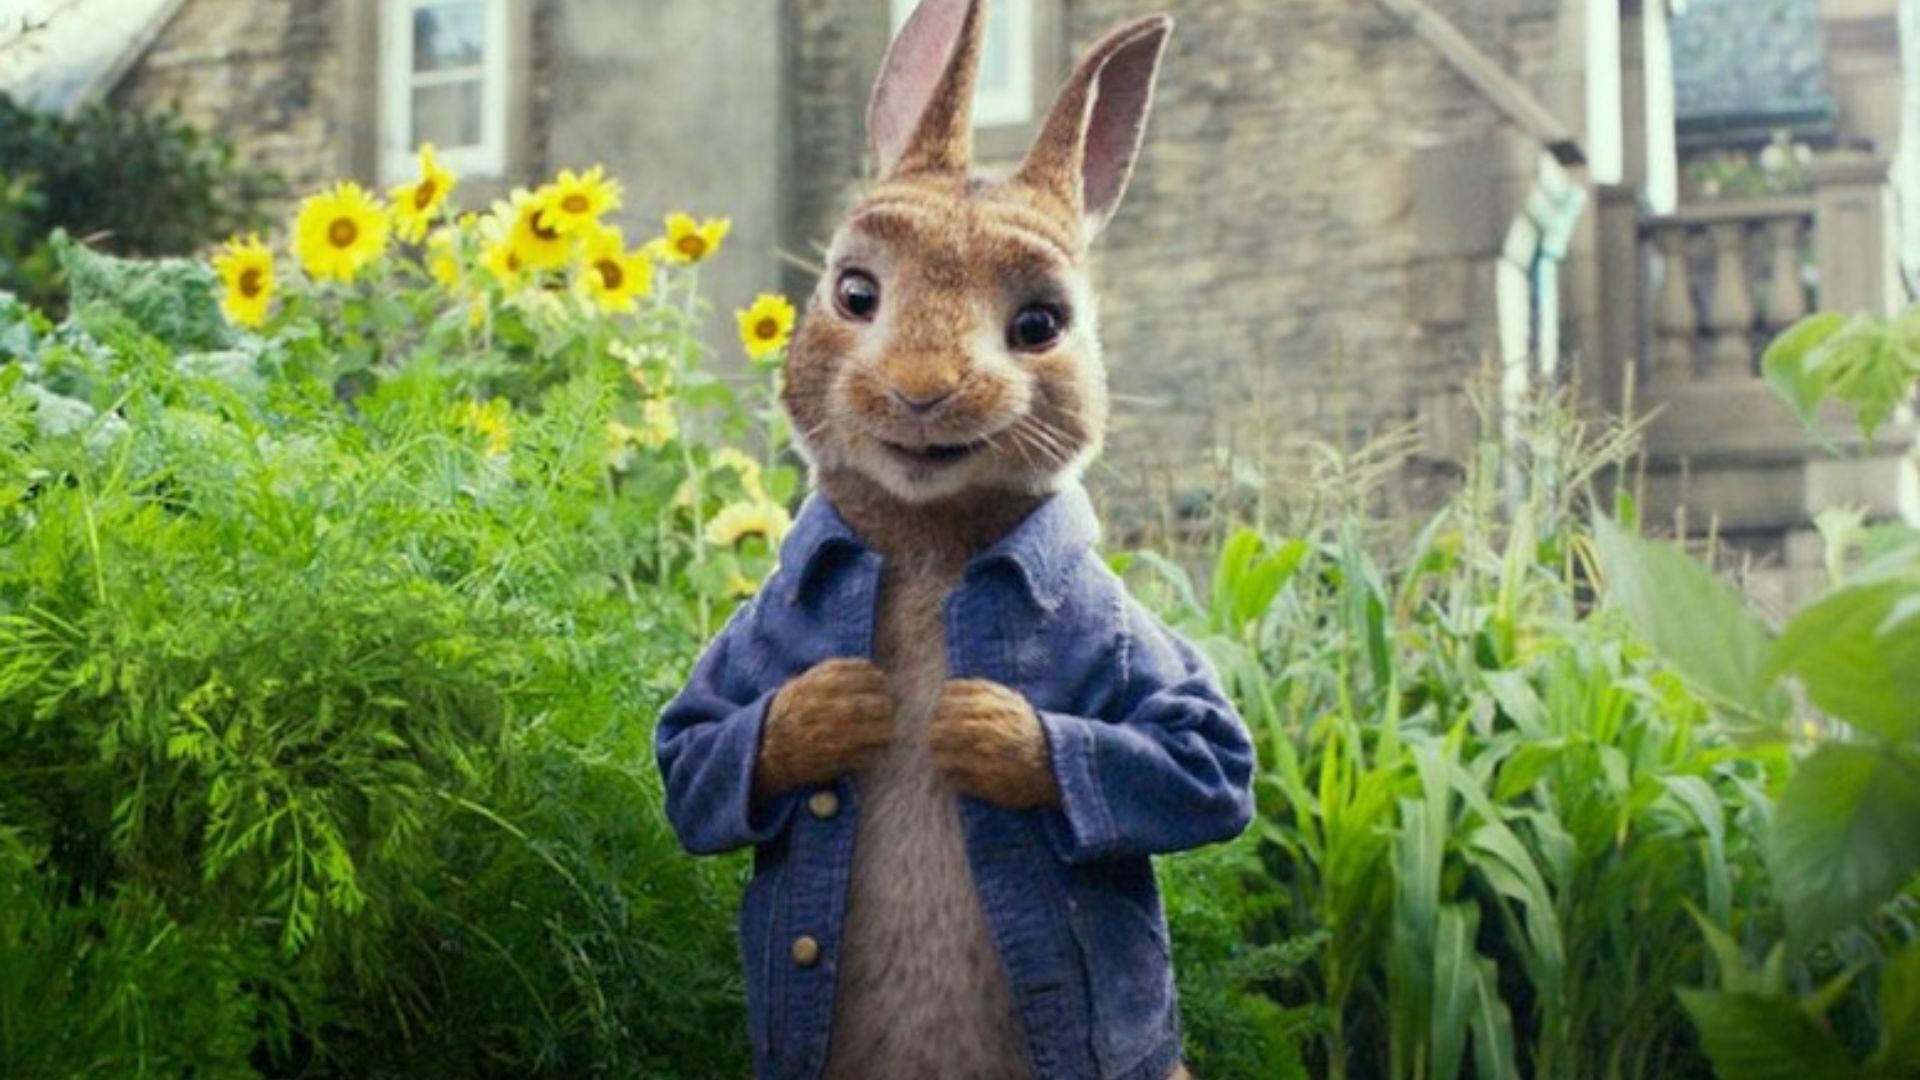 Easter Movies: A Collection of Heartwarming and Egg-citing Films